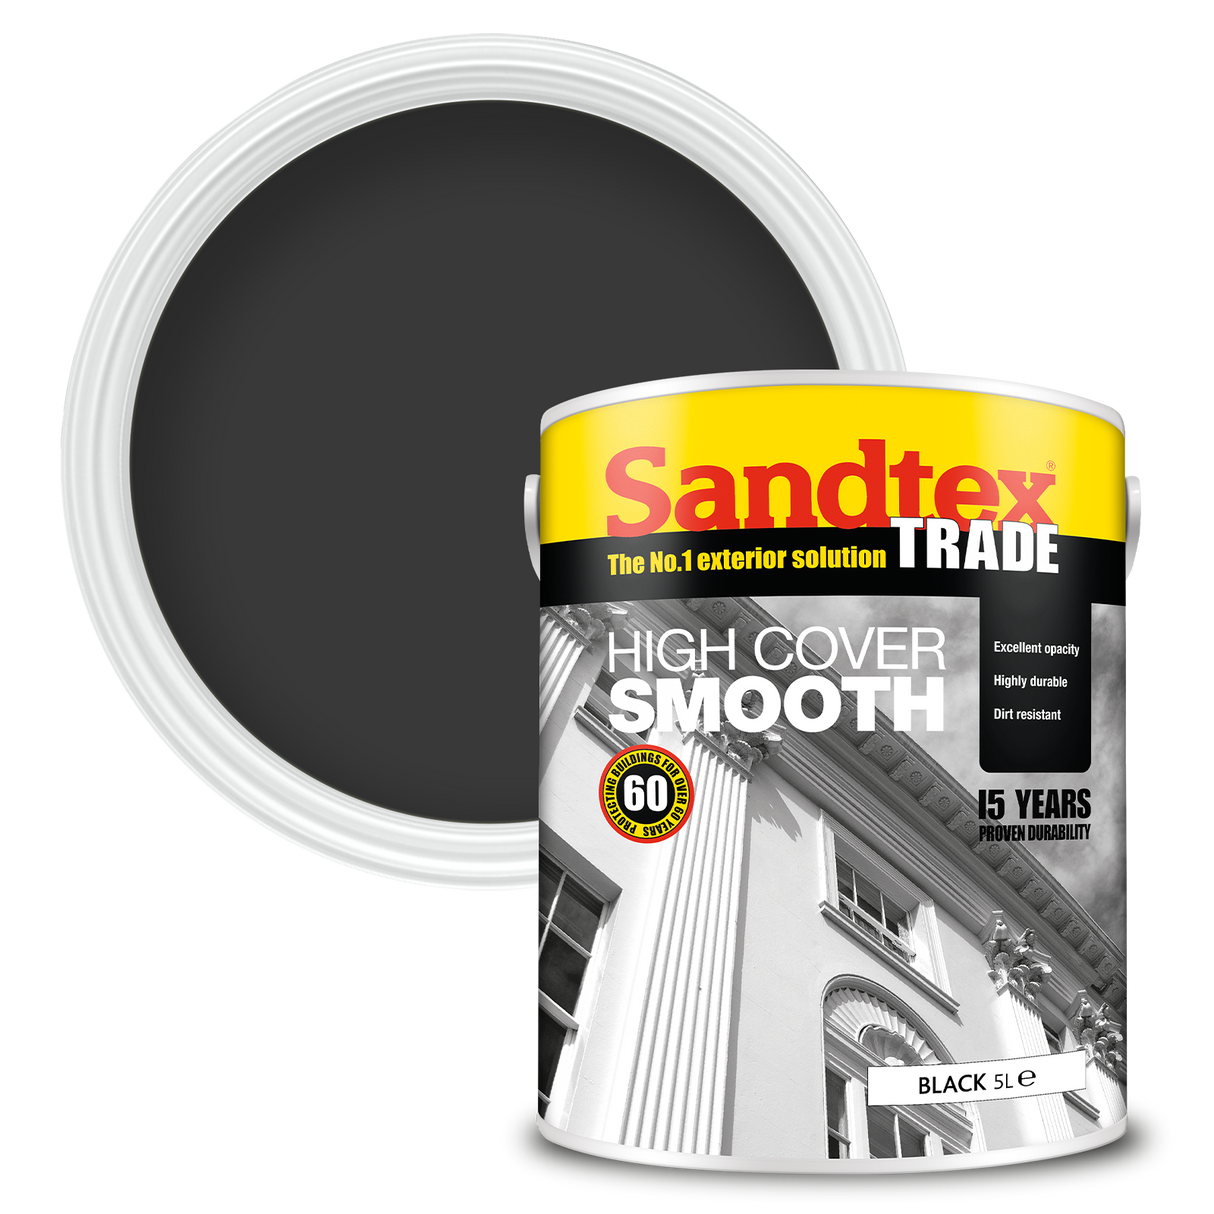 Sandtex-Trade-High-Cover-Smooth-Black-5L